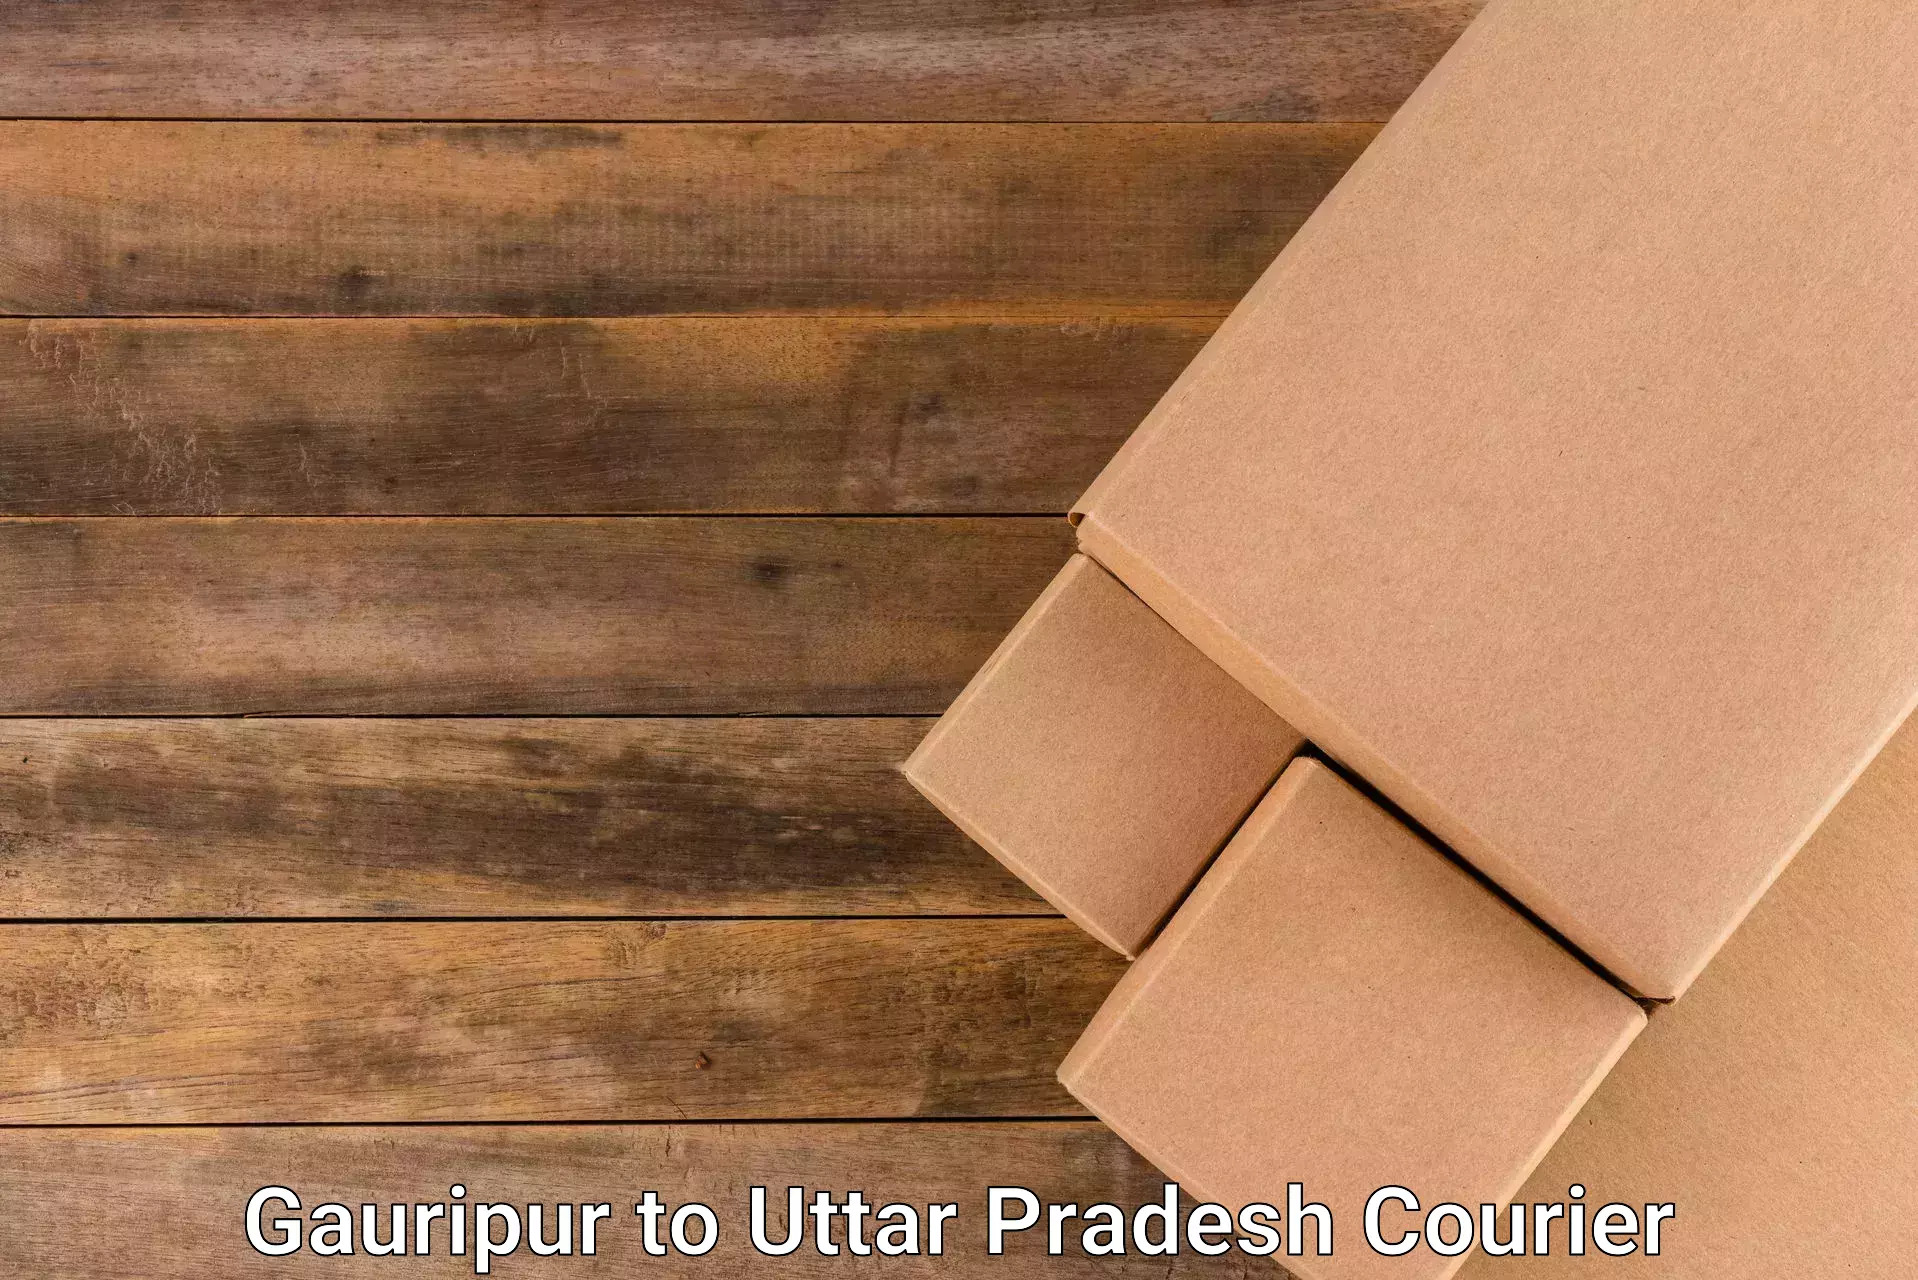 Lightweight parcel options Gauripur to Fatehpur